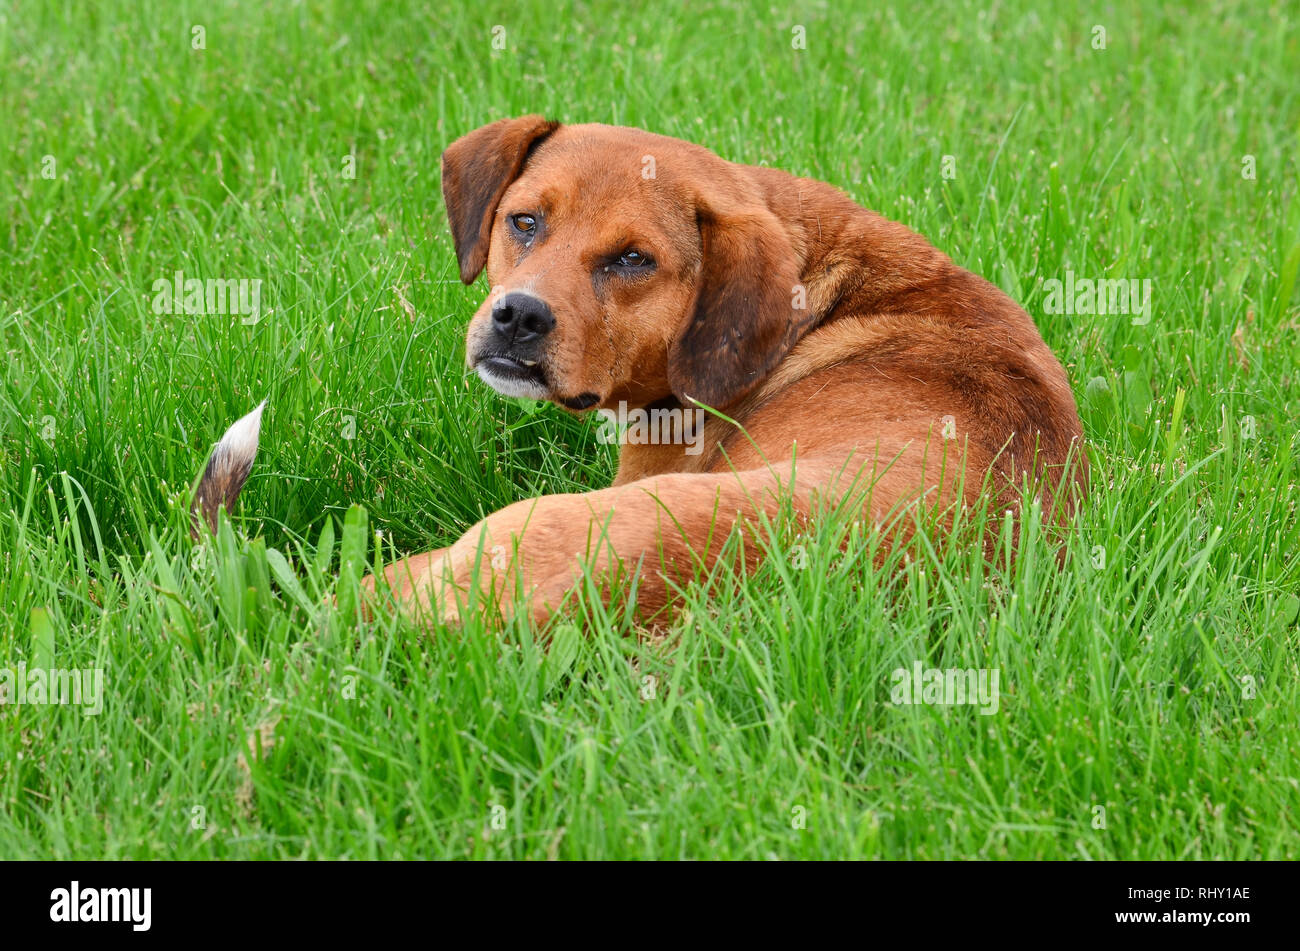 Big brown dog lying in green grass, after interrupted nap, the stray dog looks cautiously Stock Photo